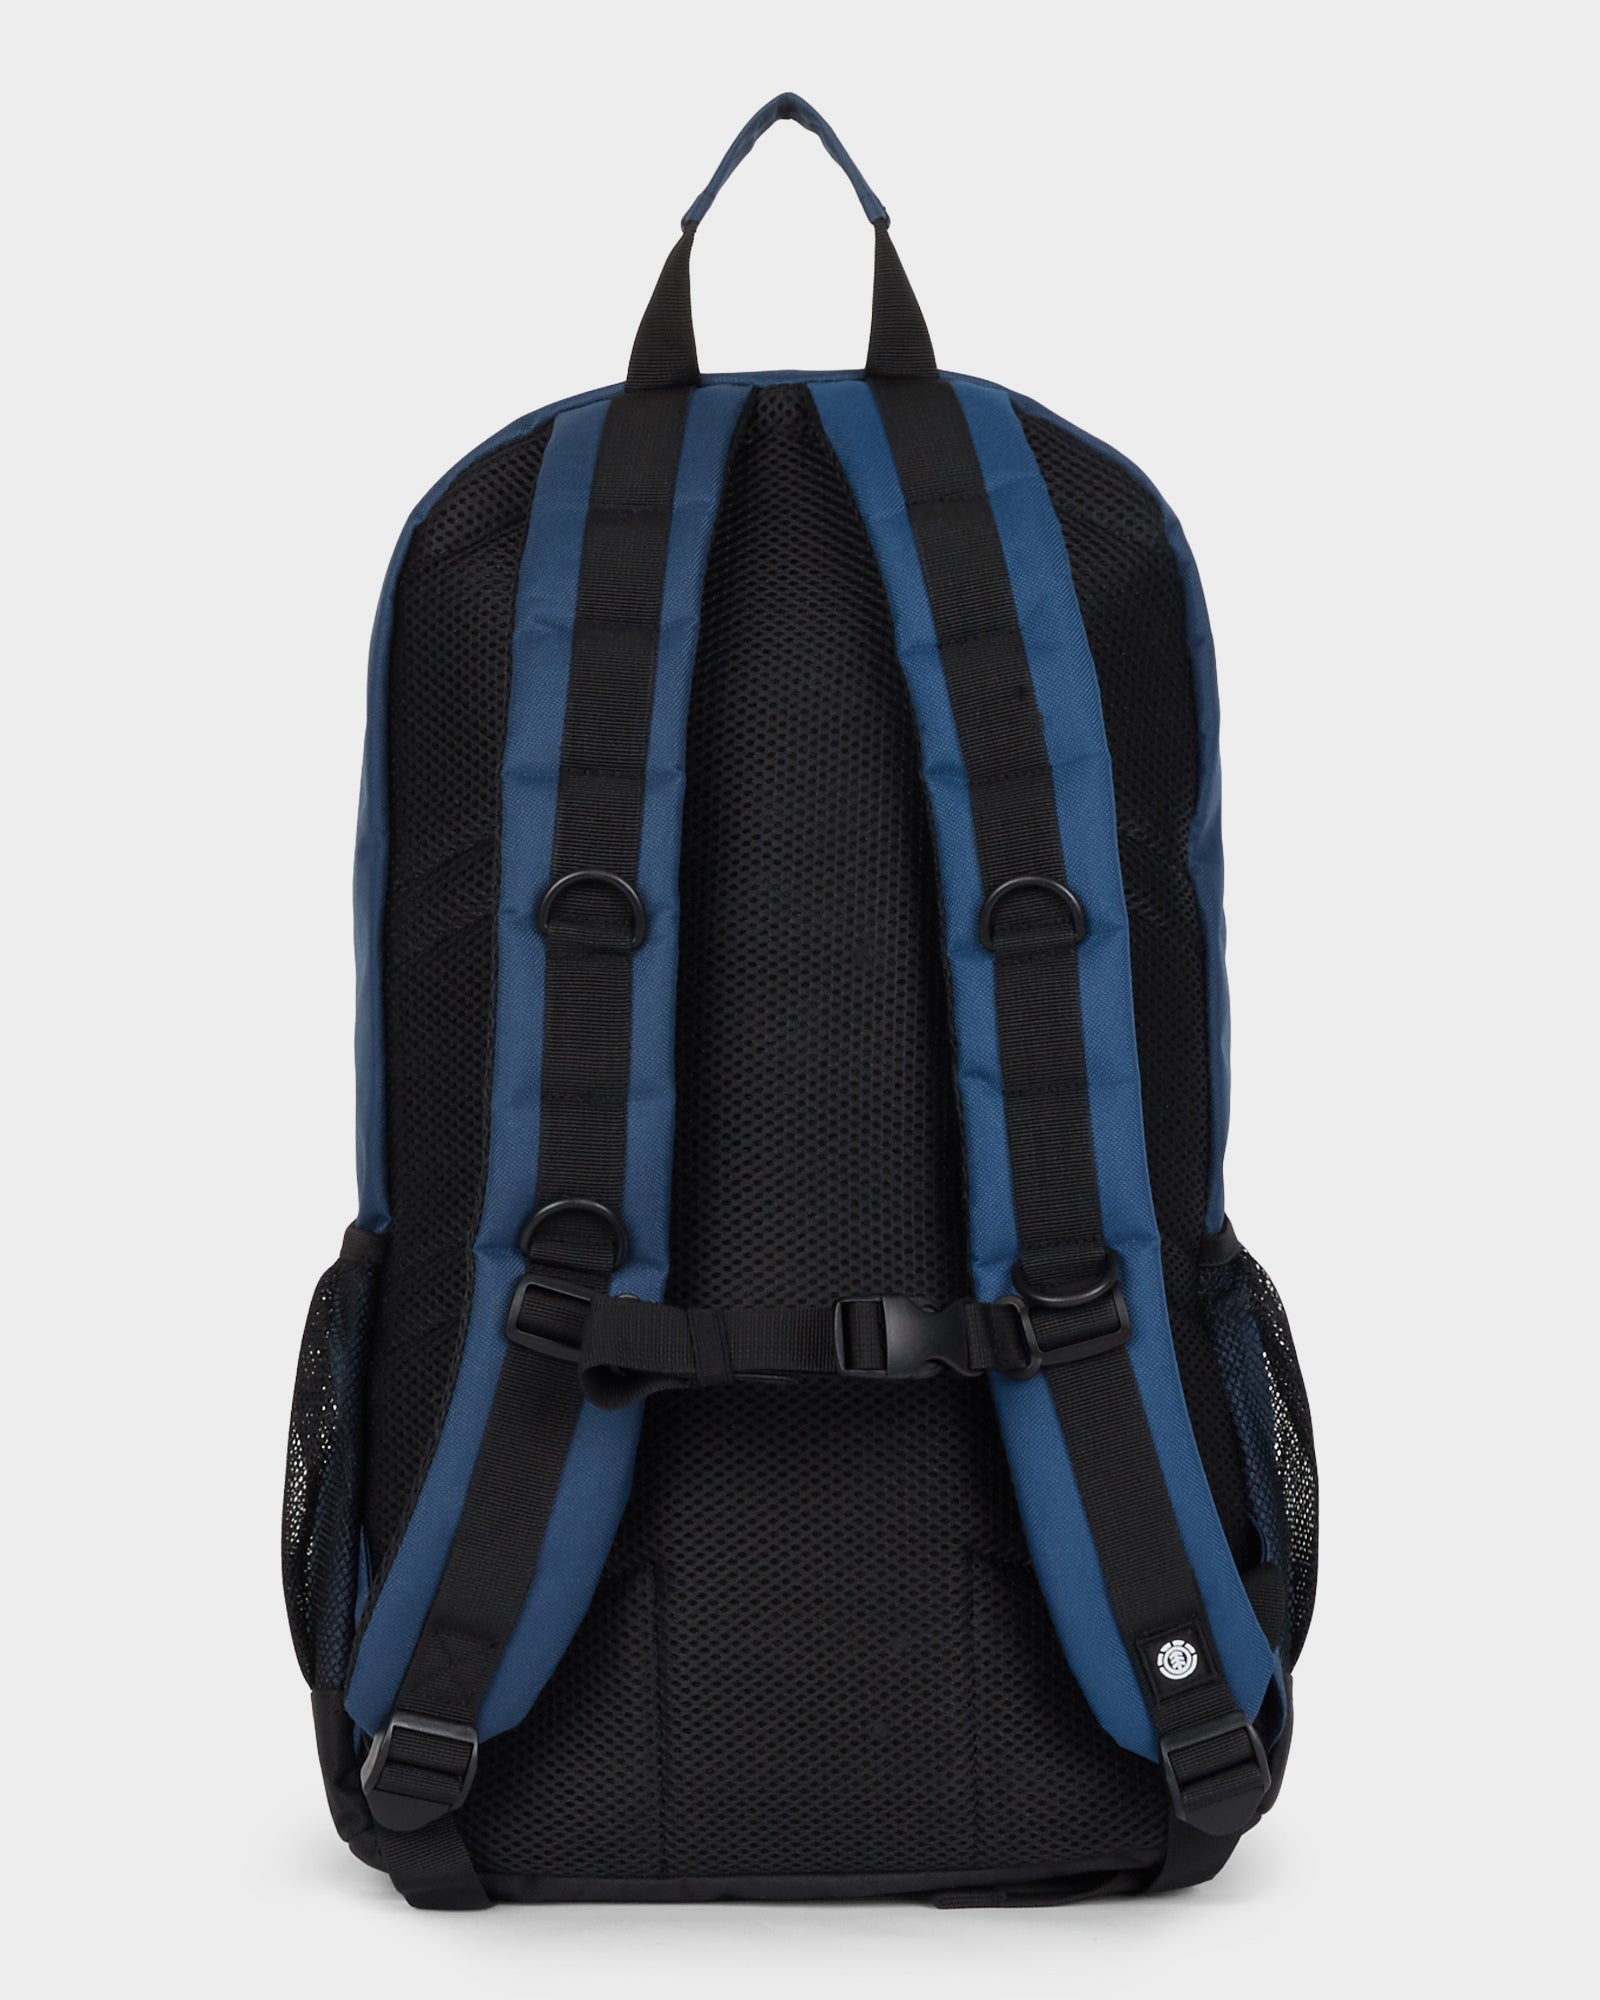 CYPRESS BACKPACK MIDNIGHT BLUE